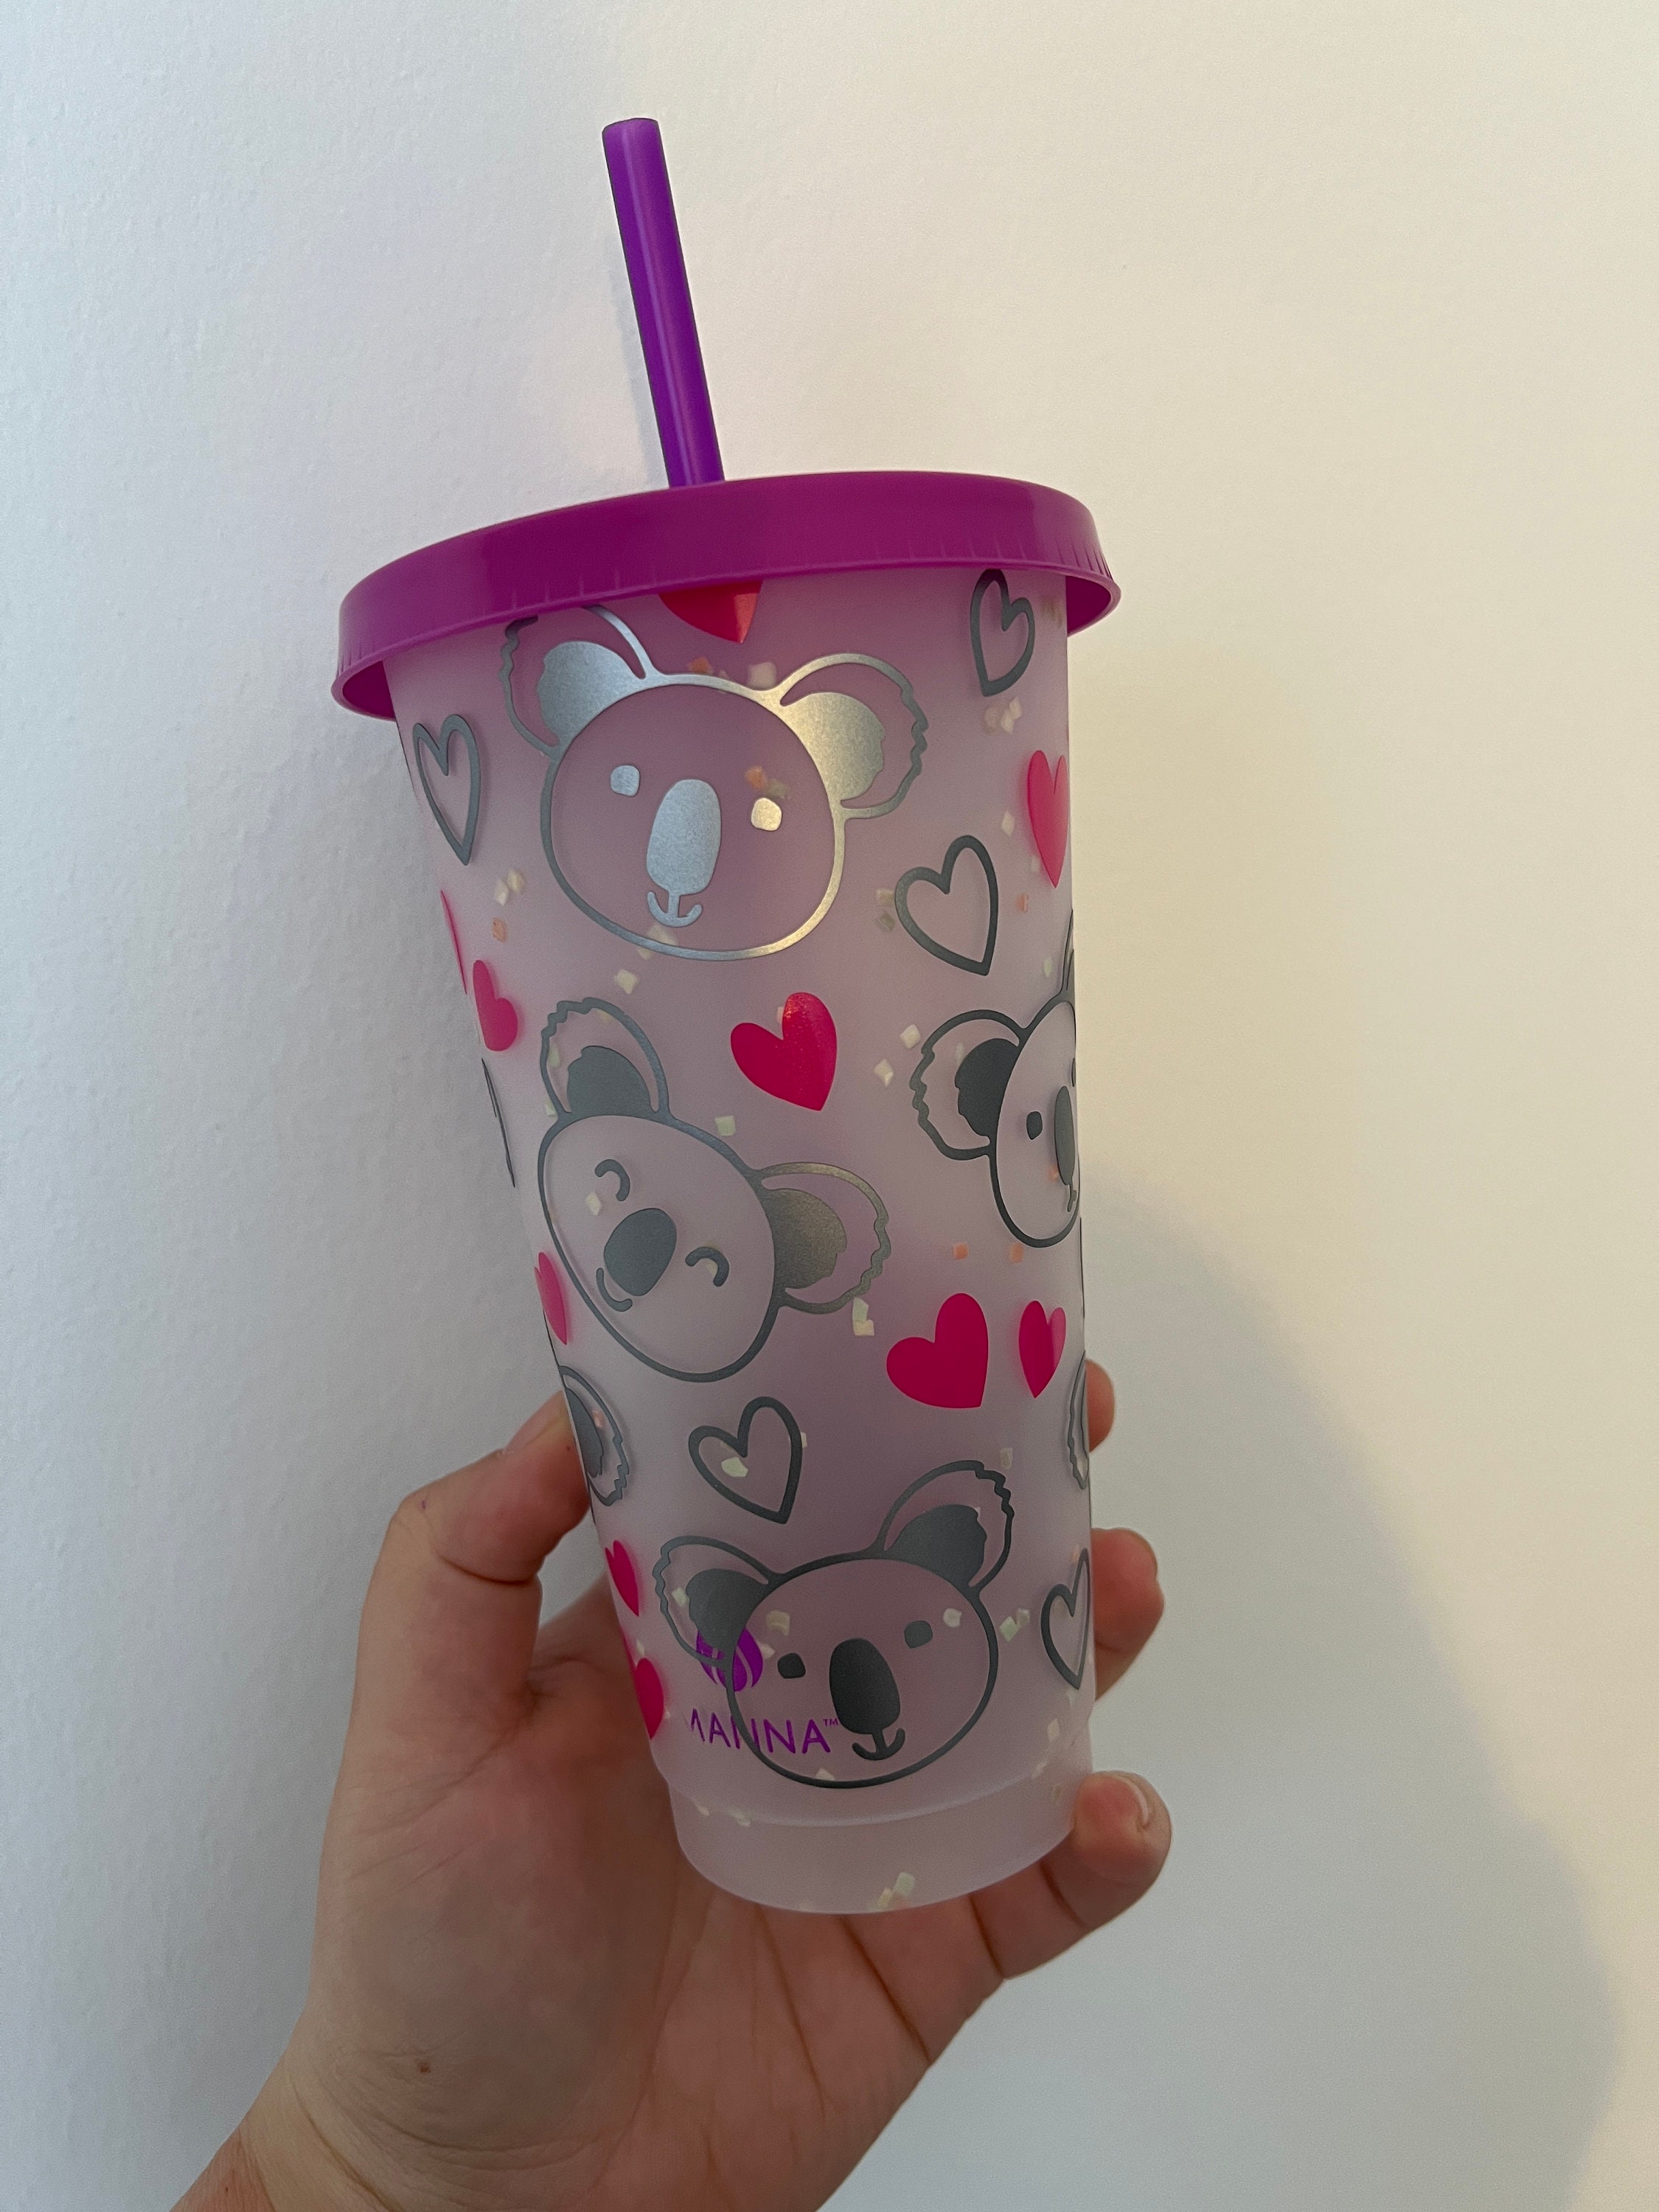 KOIXA Cute Koala Bear Stainless Steel Tumbler With Lid 20 Oz  Jewelry Style Insulated Travel Cup Animal Print Mug Funny Saying Koala Gifts  For Girls Birthday Present For Her: Tumblers